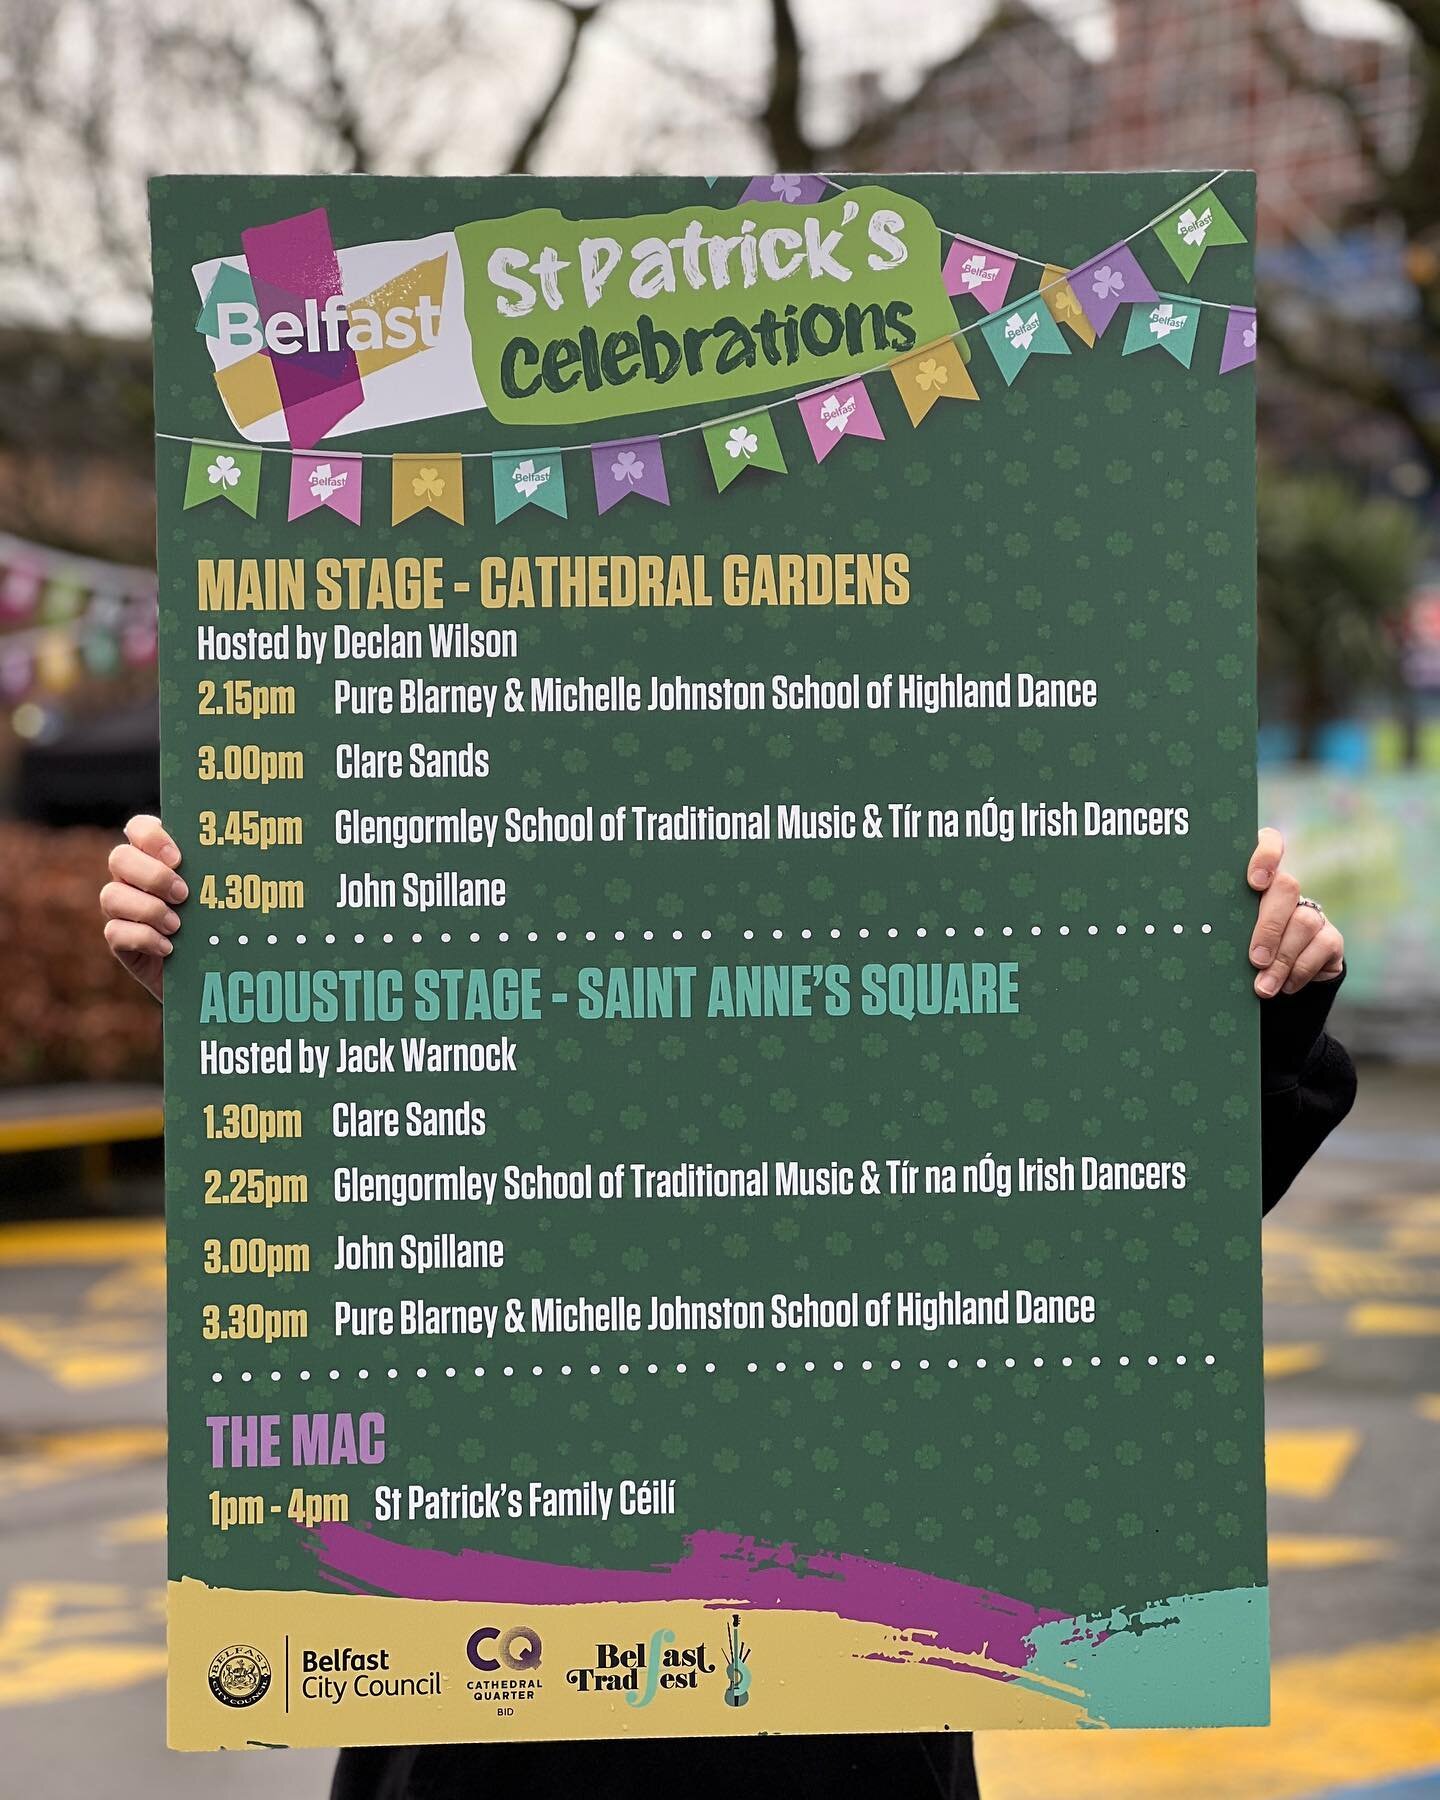 Rain, hail or shine we have something for everyone today with an indoor C&eacute;il&iacute; in The MAC, two outdoor live music stages, a food village and interactive family fun 🎻✨🍀

#belfaststpats #belfast #visitbelfast #DiscoverNI